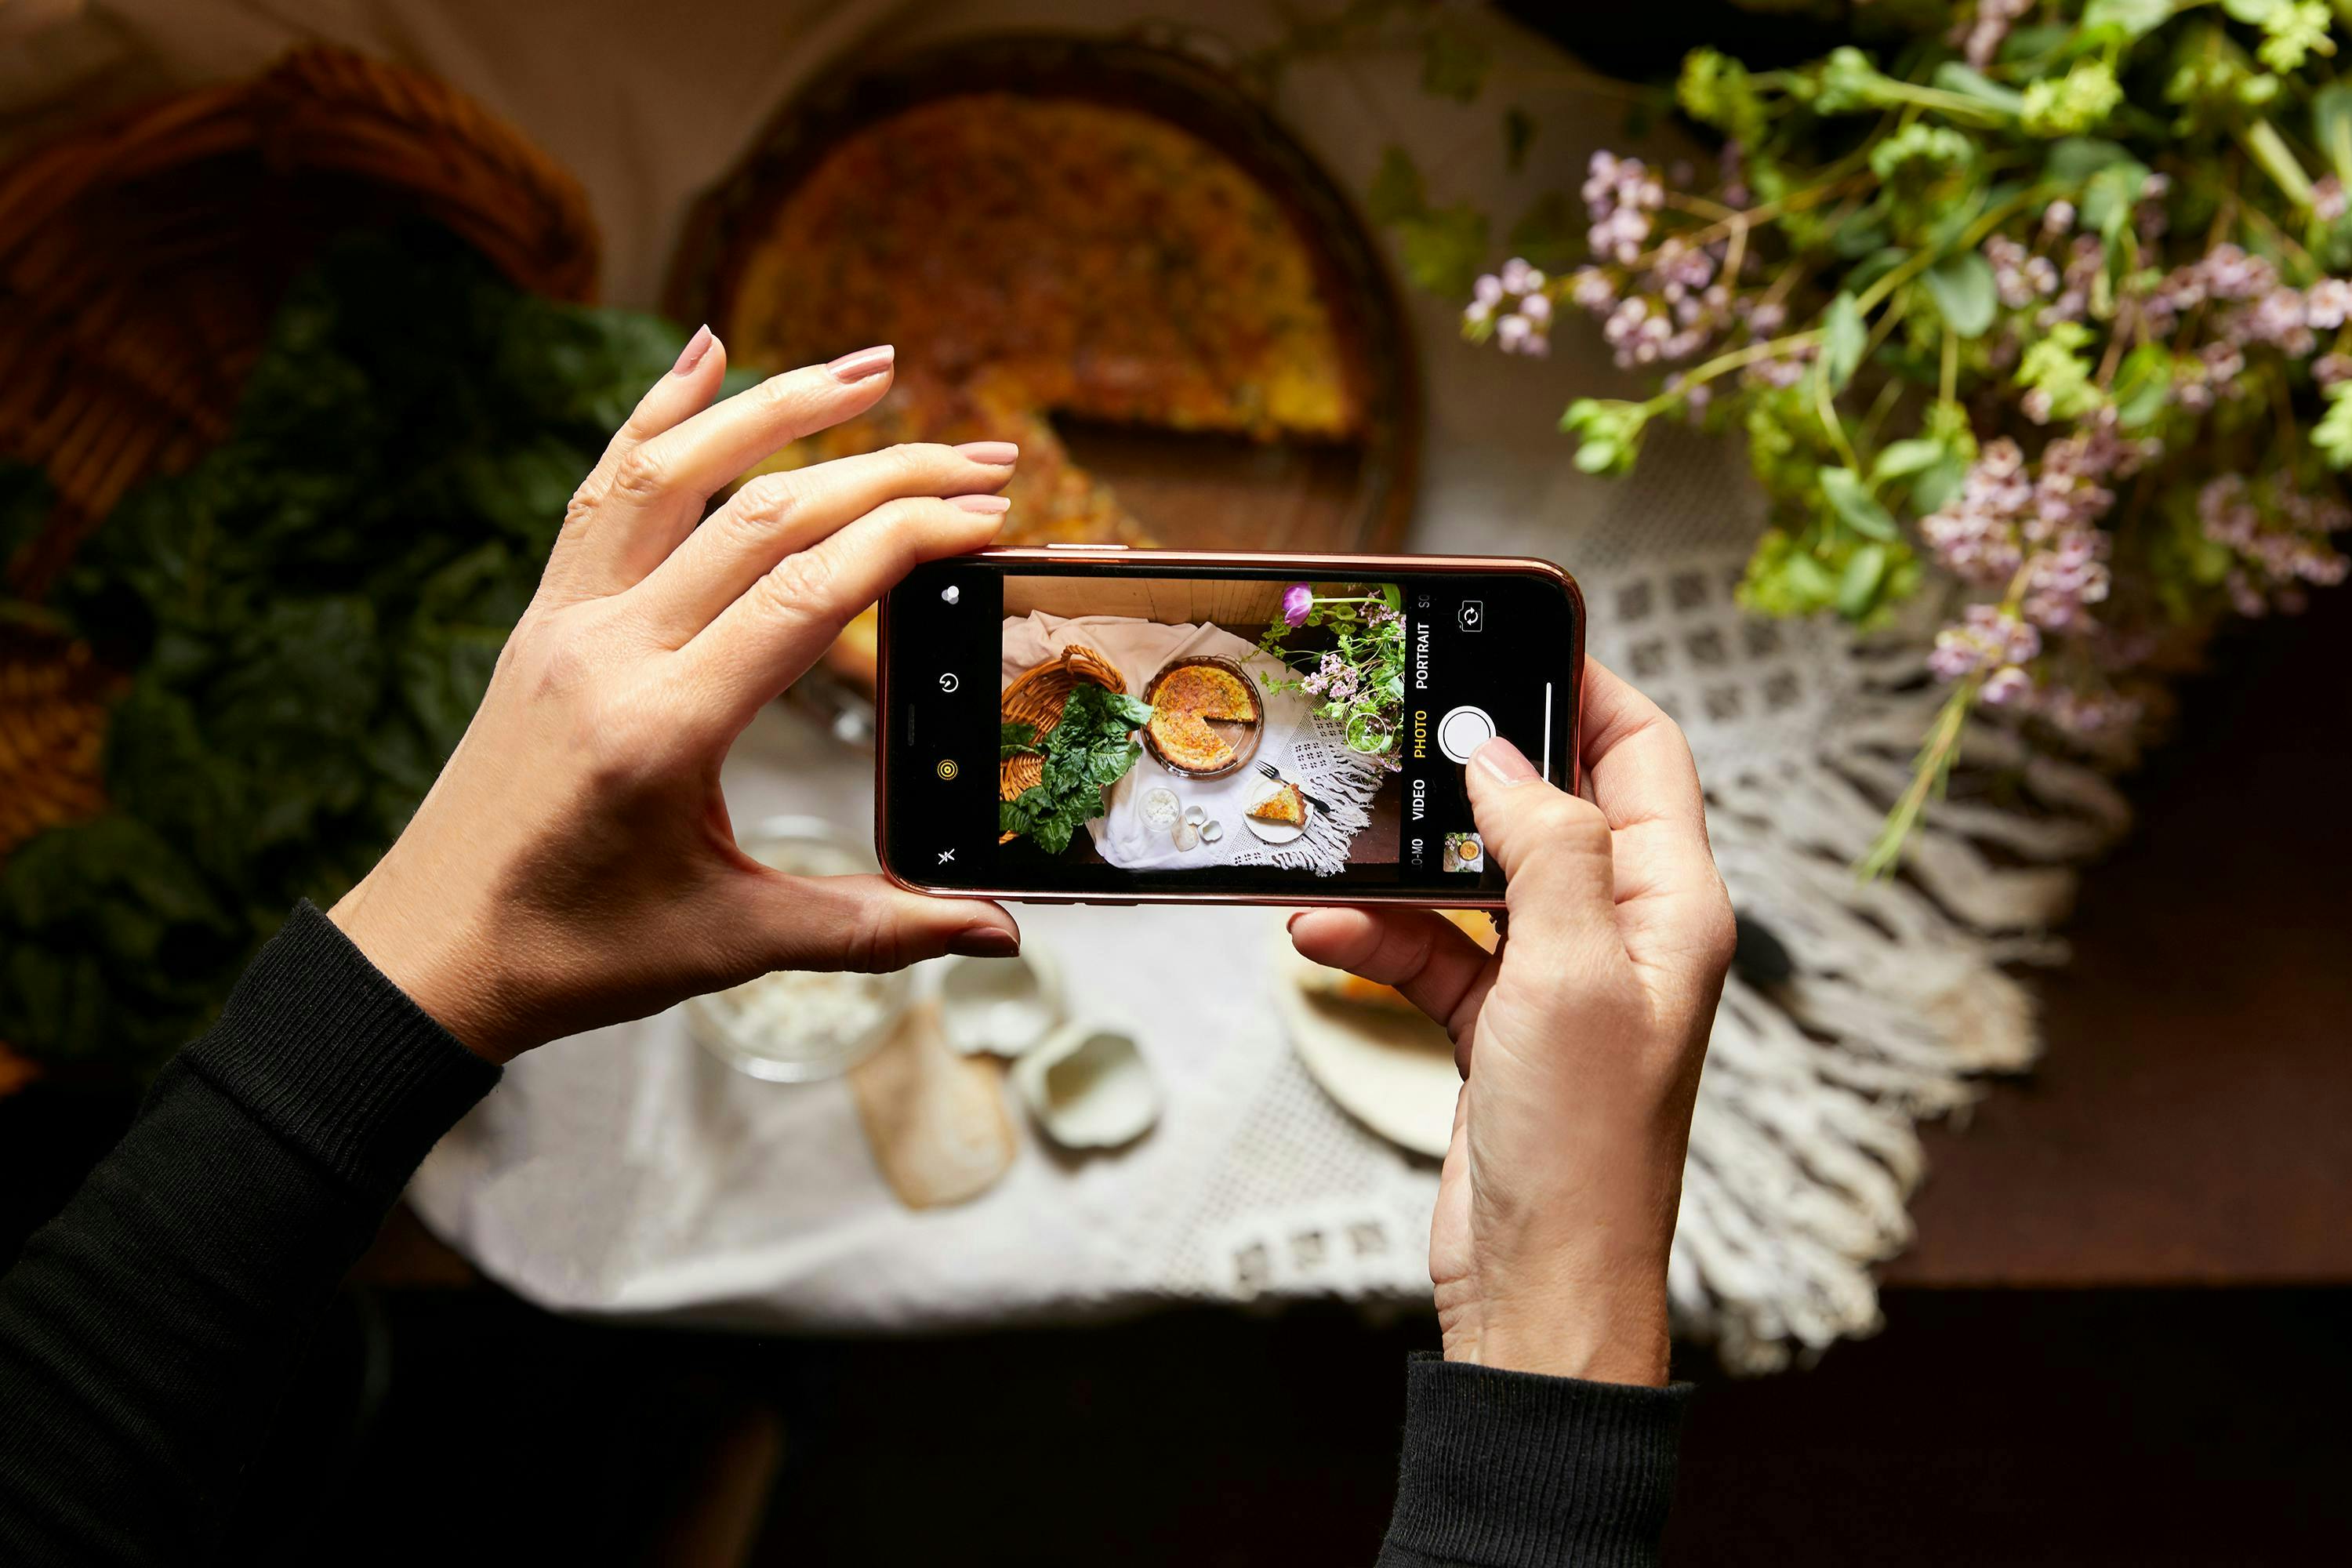 Photograph of an iPhone held up to take a picture of a freshly baked pie with a golden crust and steam rising from the top.